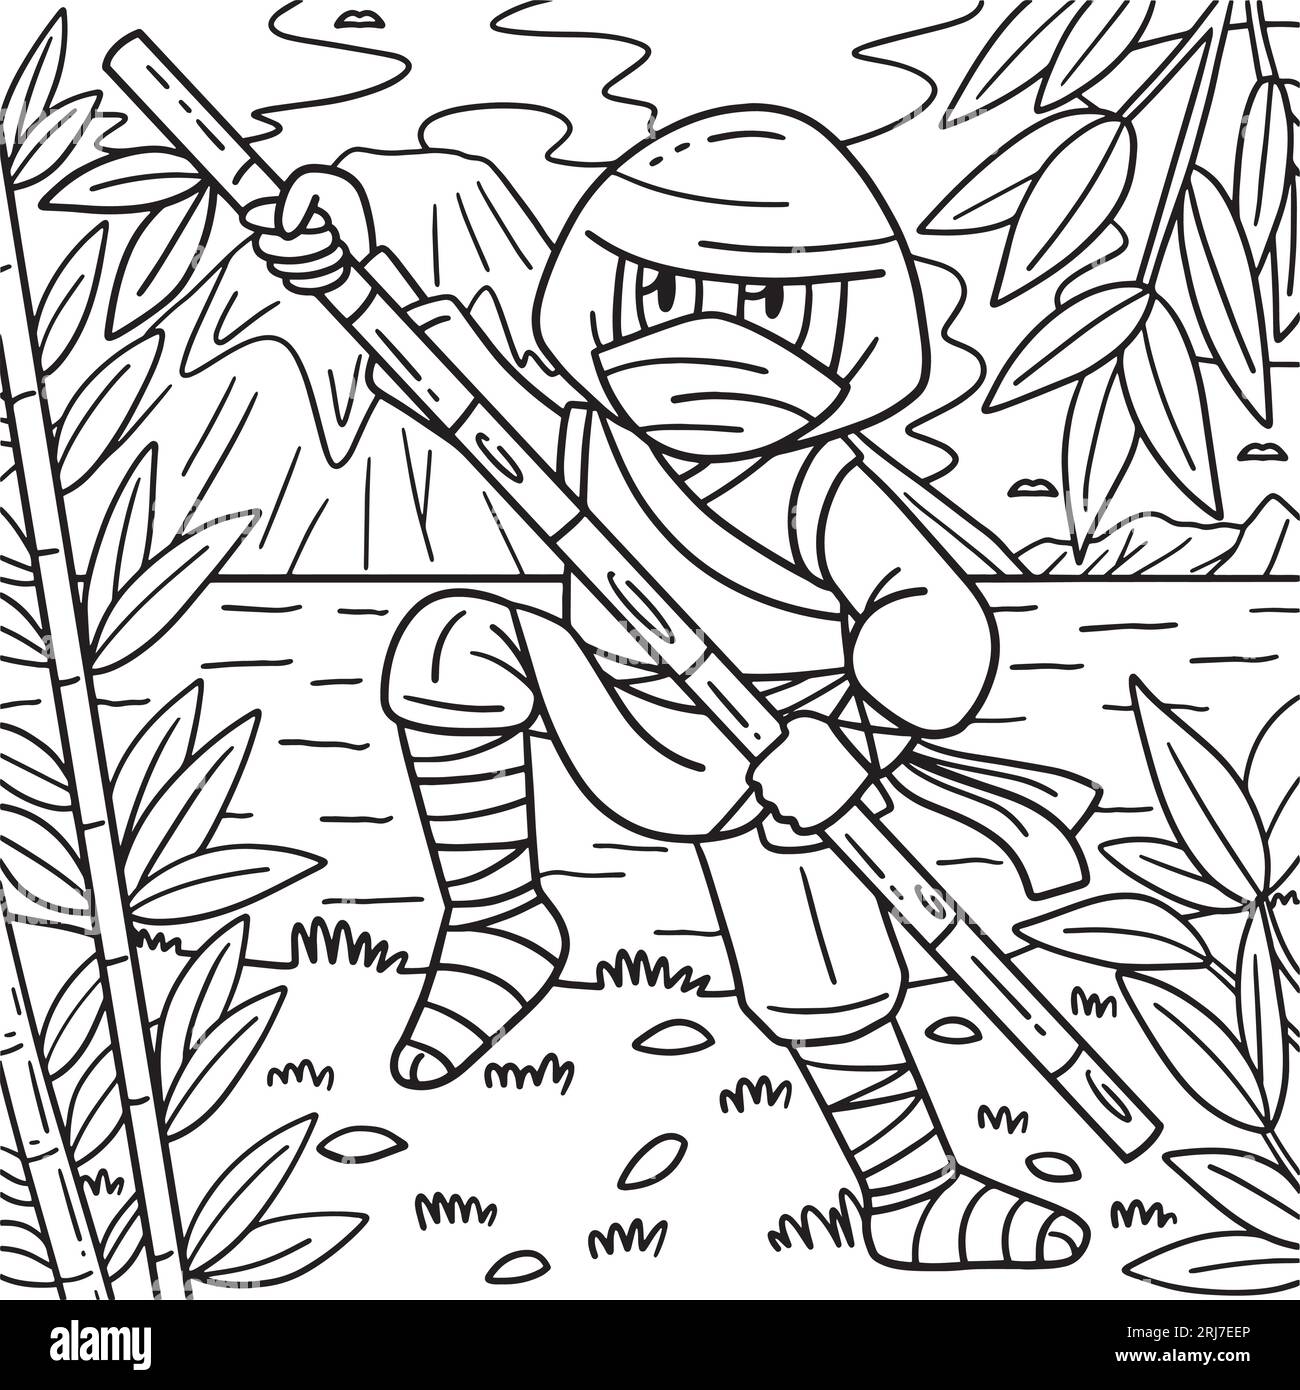 Ninja with a bamboo pole coloring page for kids stock vector image art